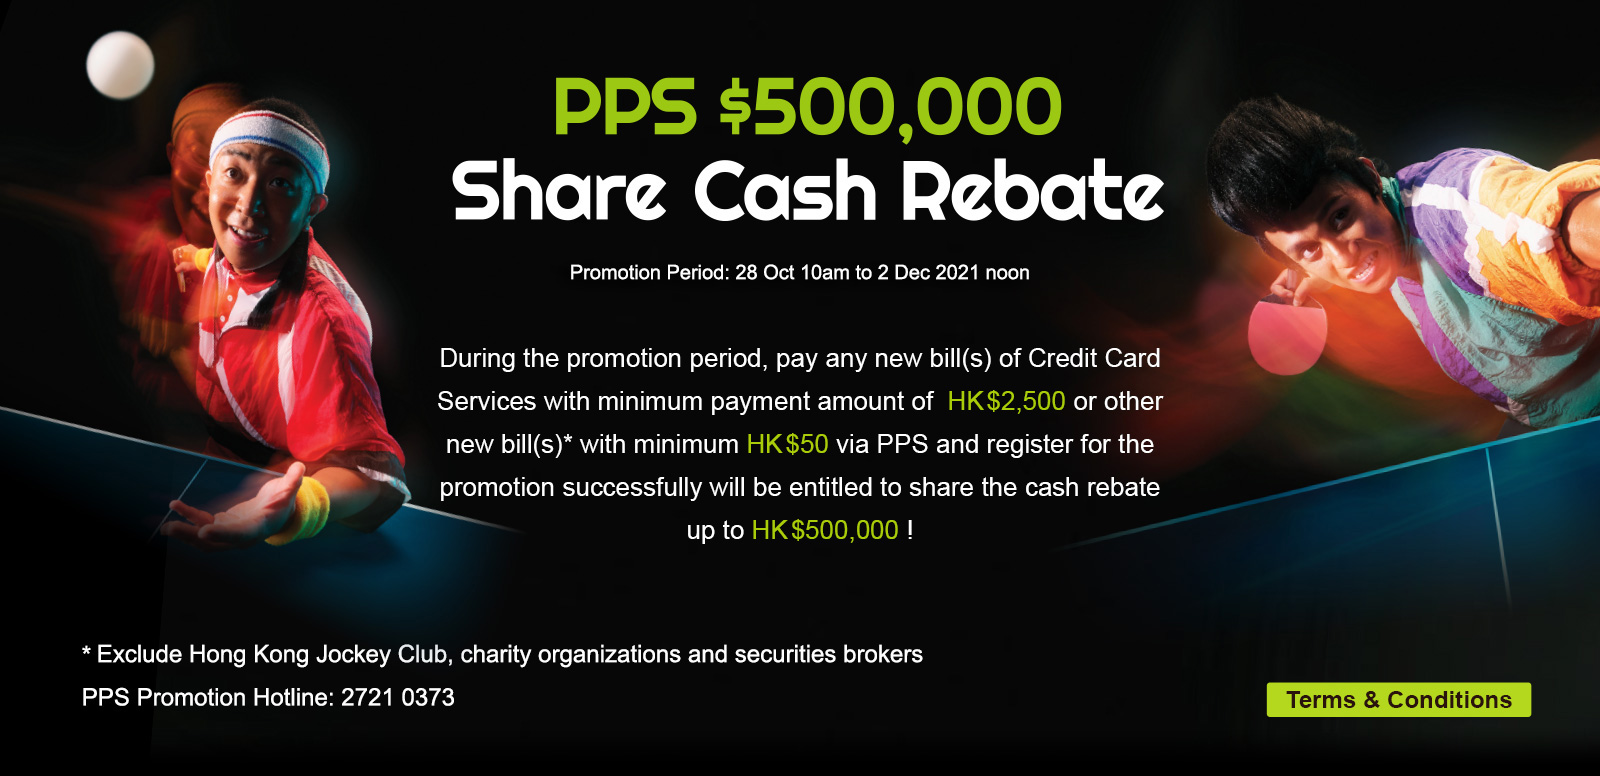 Pay a new bill to share HK500,000 Cash Rebate!